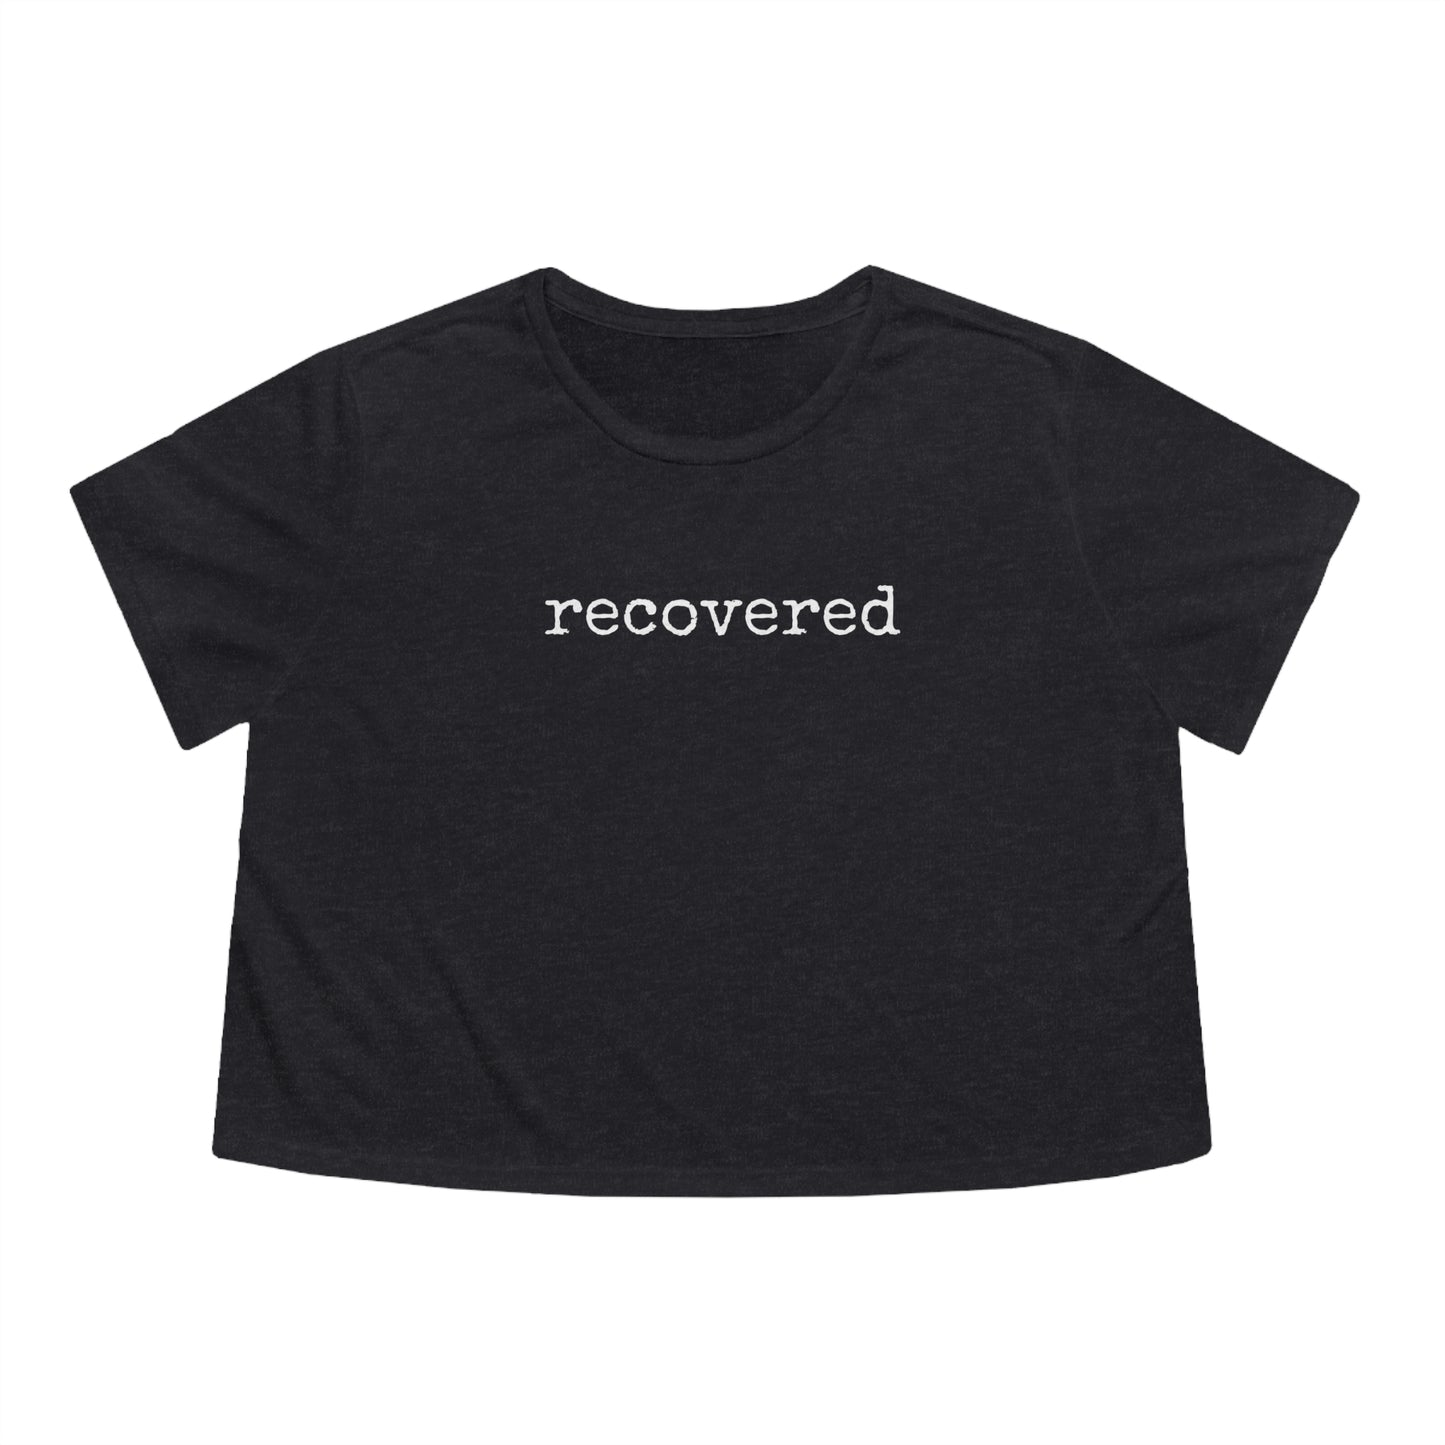 Women's Cropped "Recovered" Tshirt